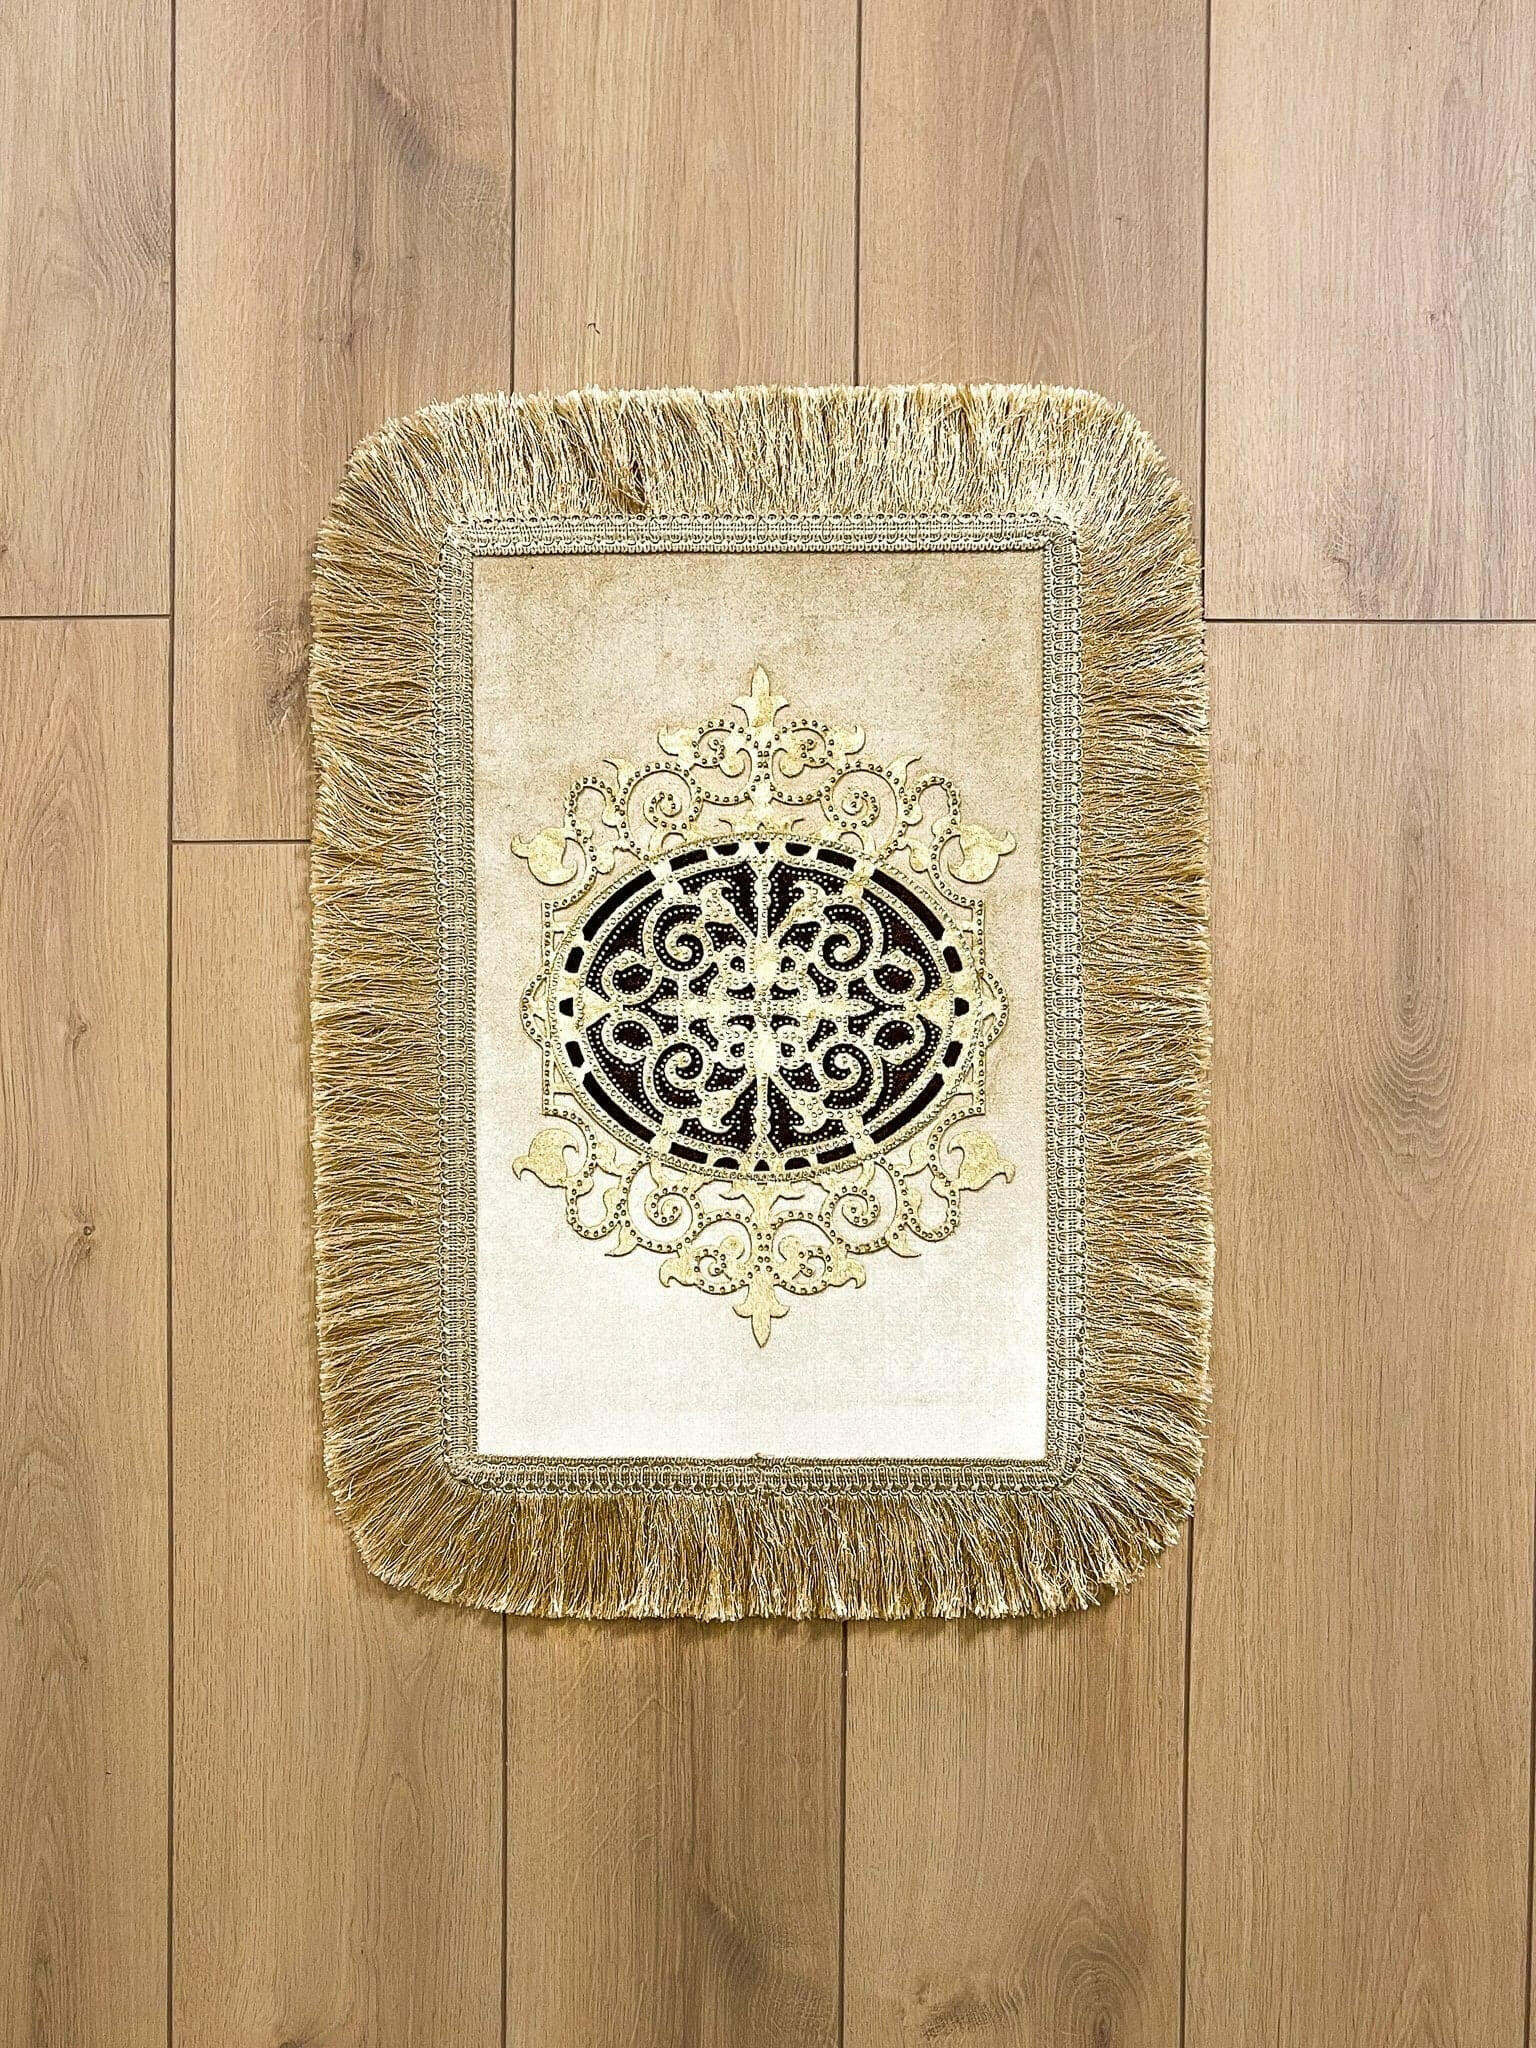 Ruya Limited Edition Rug 40 x 60 cm - Creative Home Designs, Velvet Royal Luxury Turkish Gold Color Carpet or Mat with Tassels